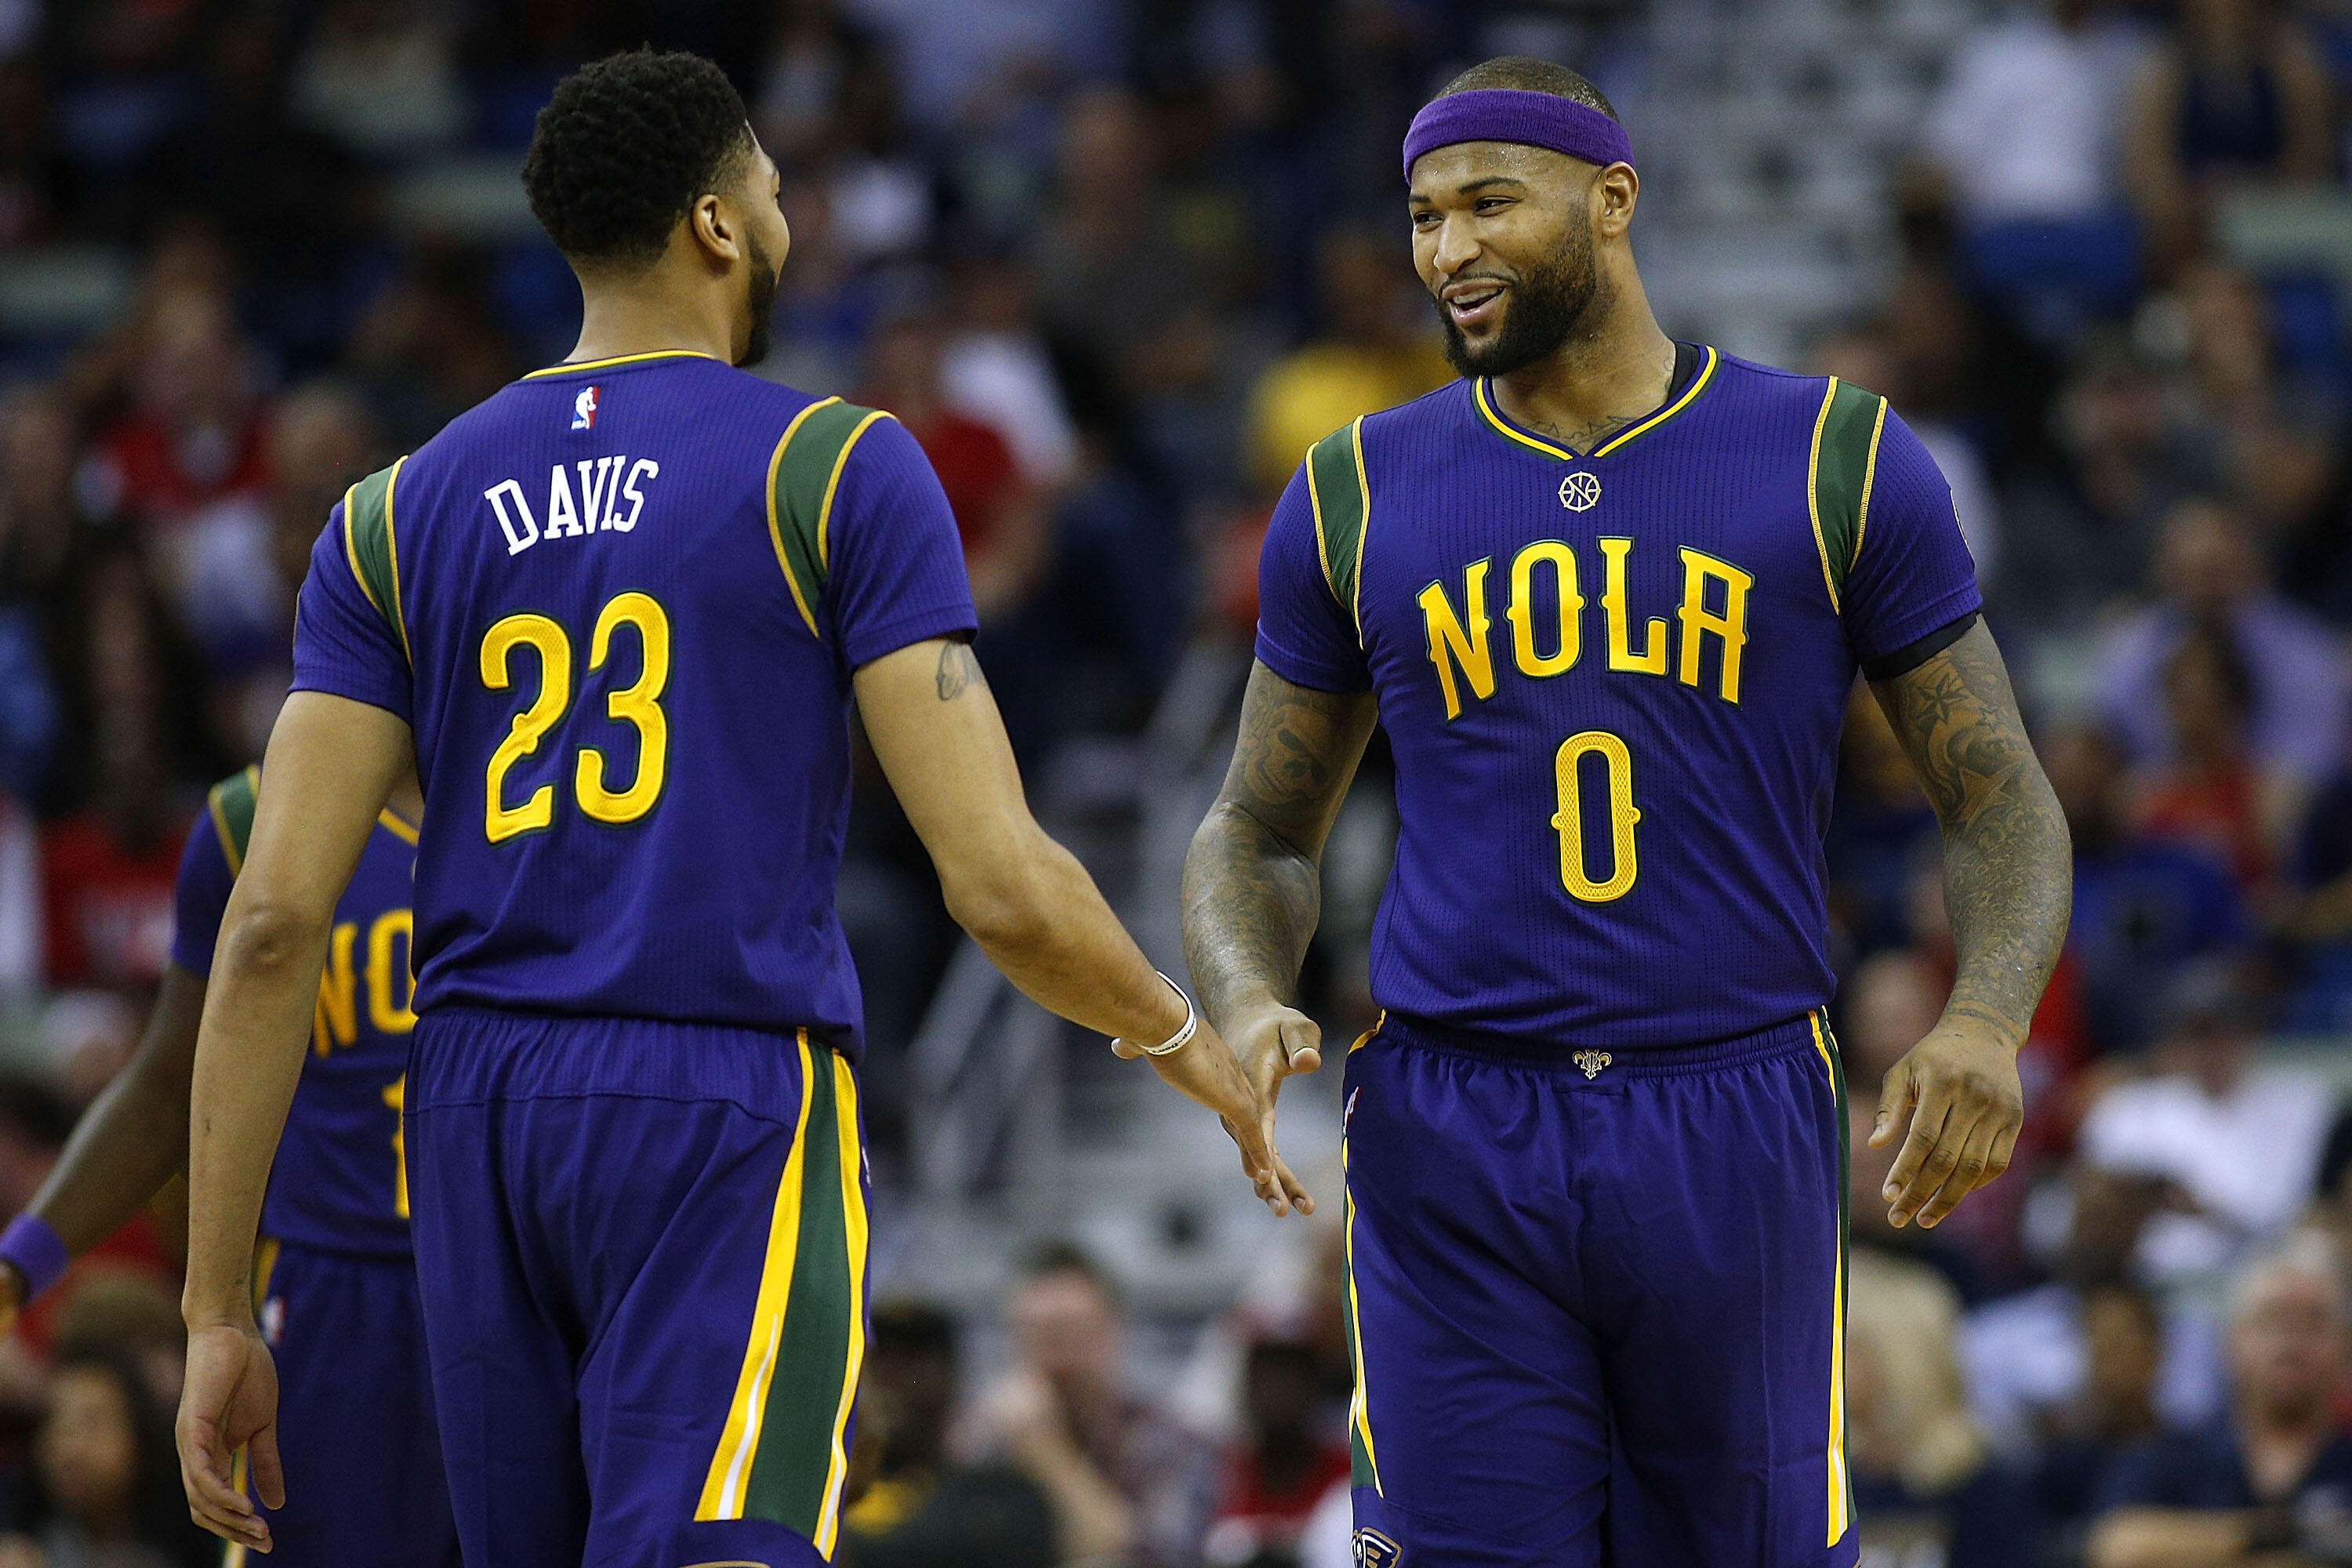 NEW ORLEANS, LA - FEBRUARY 23:  DeMarcus Cousins #0 of the New Orleans Pelicans and Anthony Davis #23 talk during a game against the Houston Rockets at the Smoothie King Center on February 23, 2017 in New Orleans, Louisiana. NOTE TO USER: User expressly a